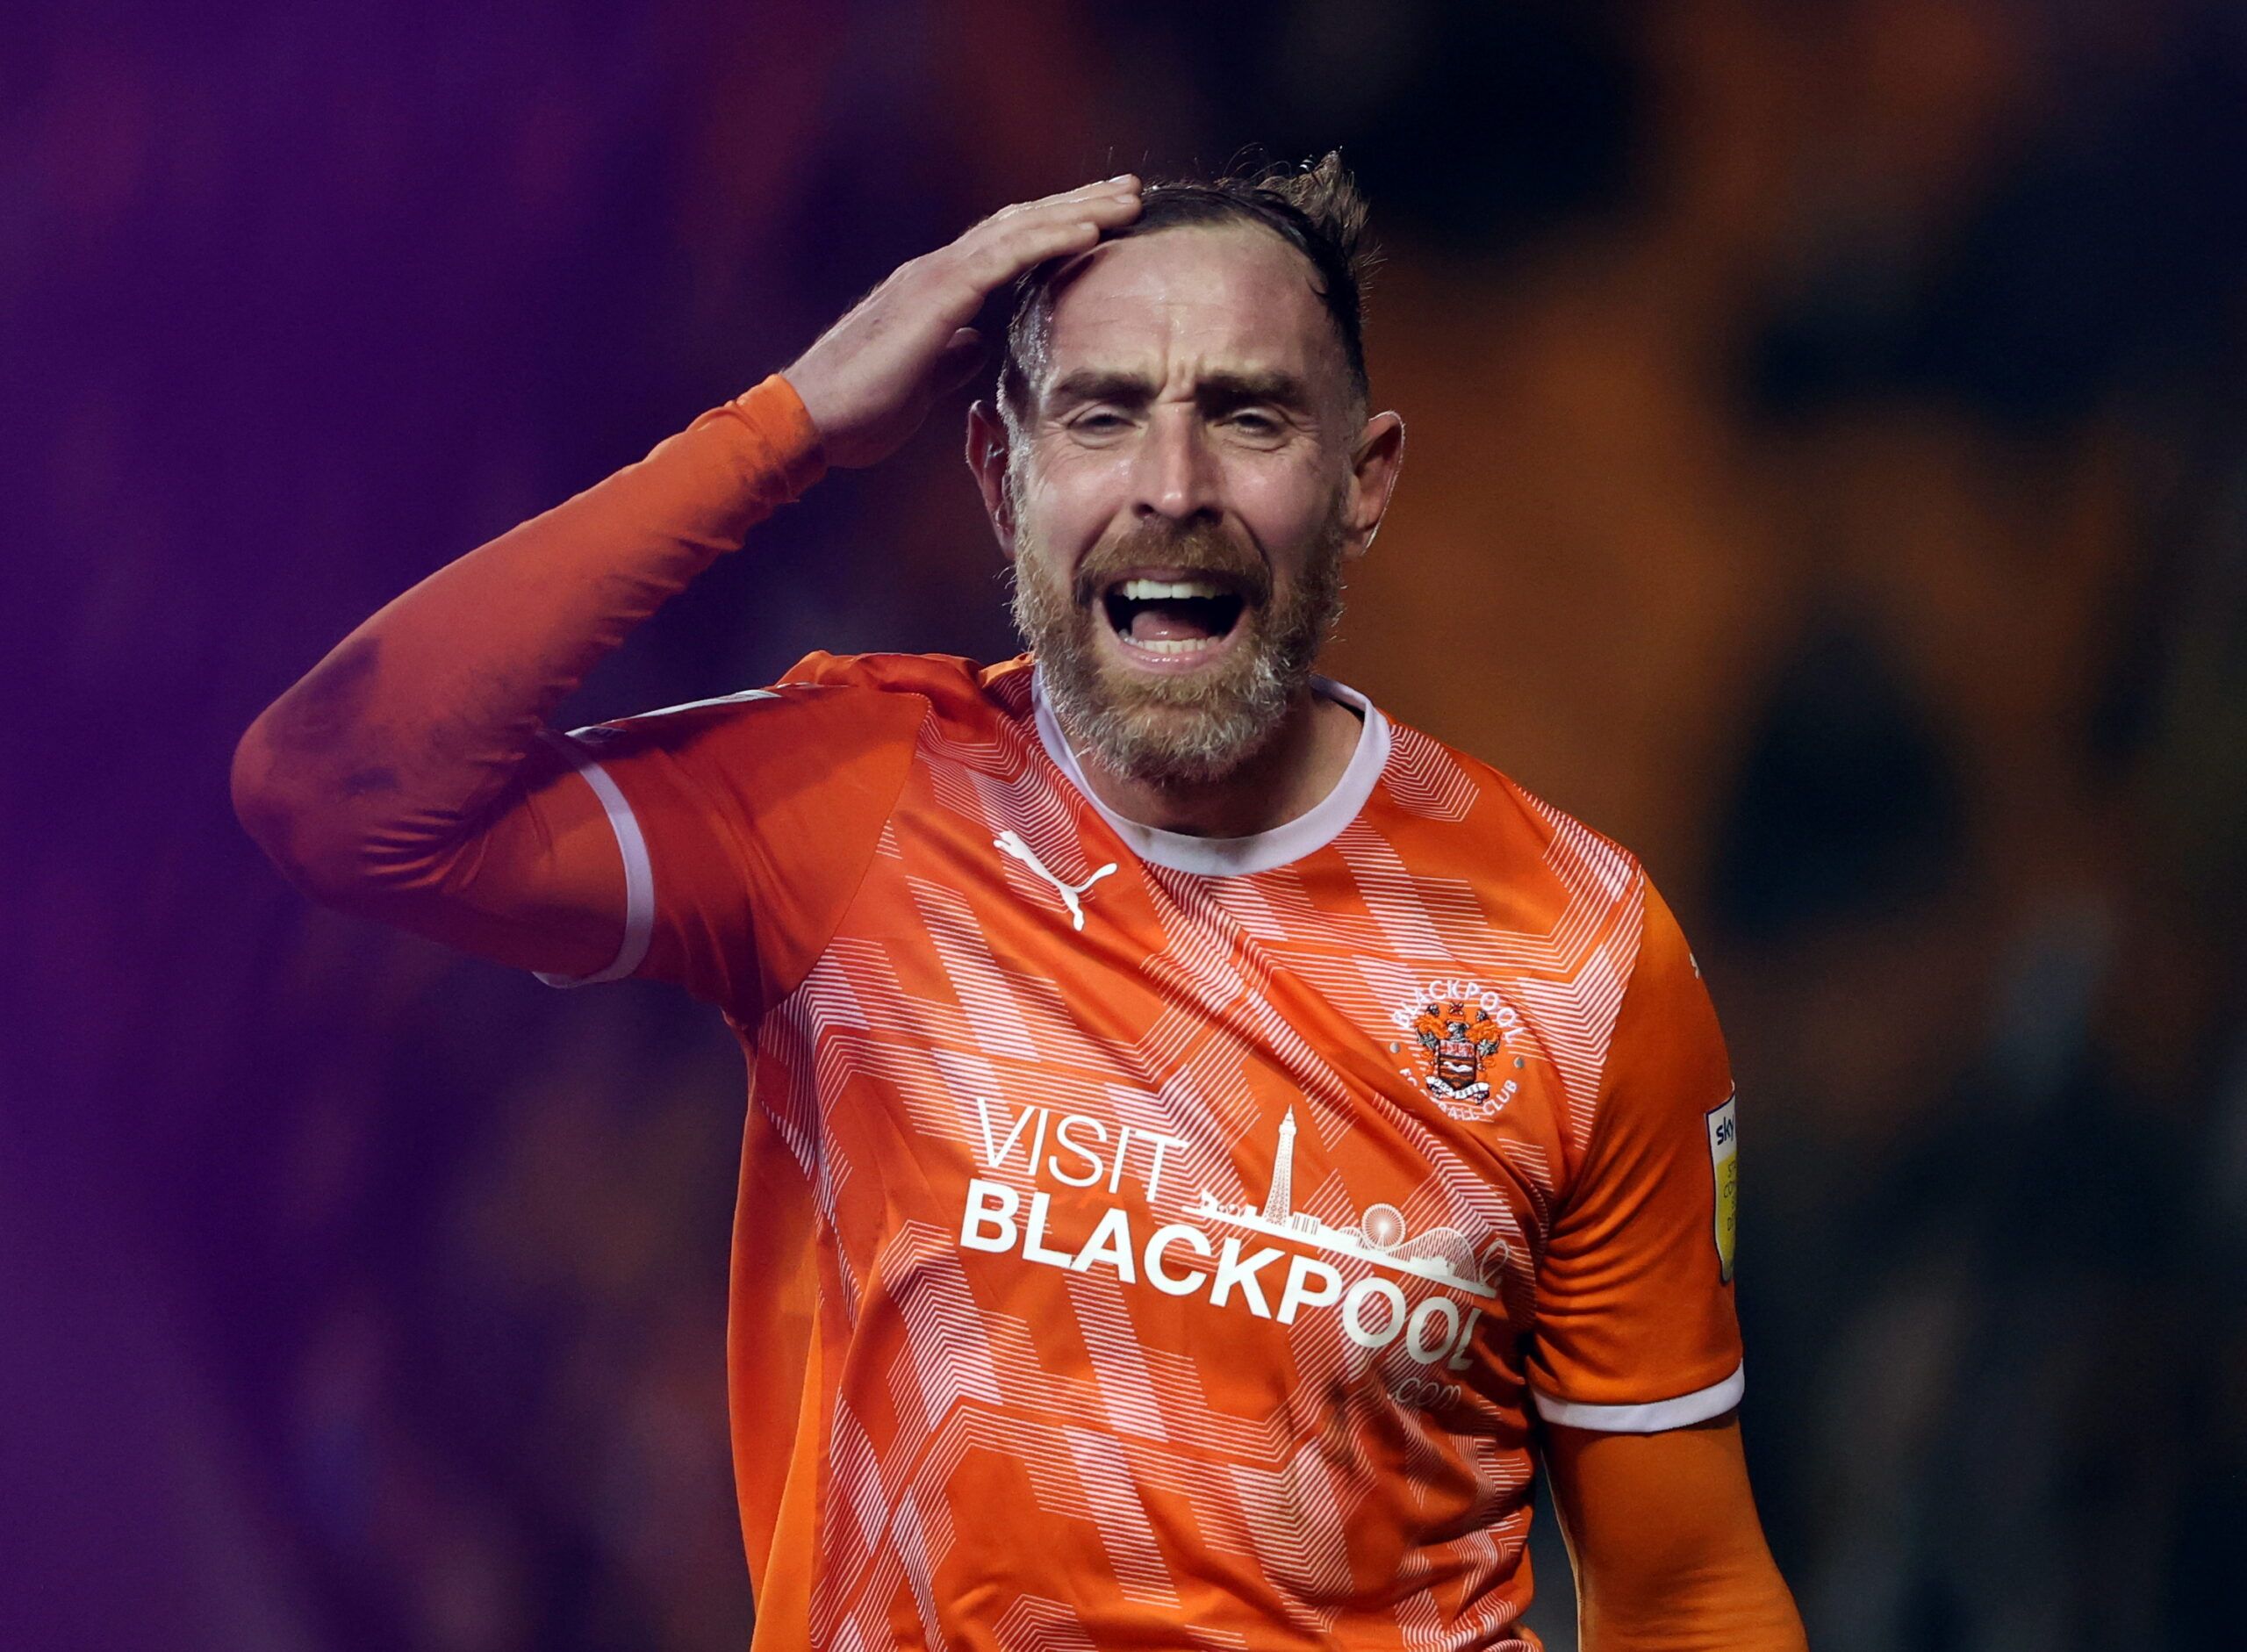 Soccer Football - Championship - Blackpool v Middlesbrough - Bloomfield Road, Blackpool, Britain - December 29, 2021 Blackpool's Richard Keogh reacts Action Images/Molly Darlington  EDITORIAL USE ONLY. No use with unauthorized audio, video, data, fixture lists, club/league logos or 